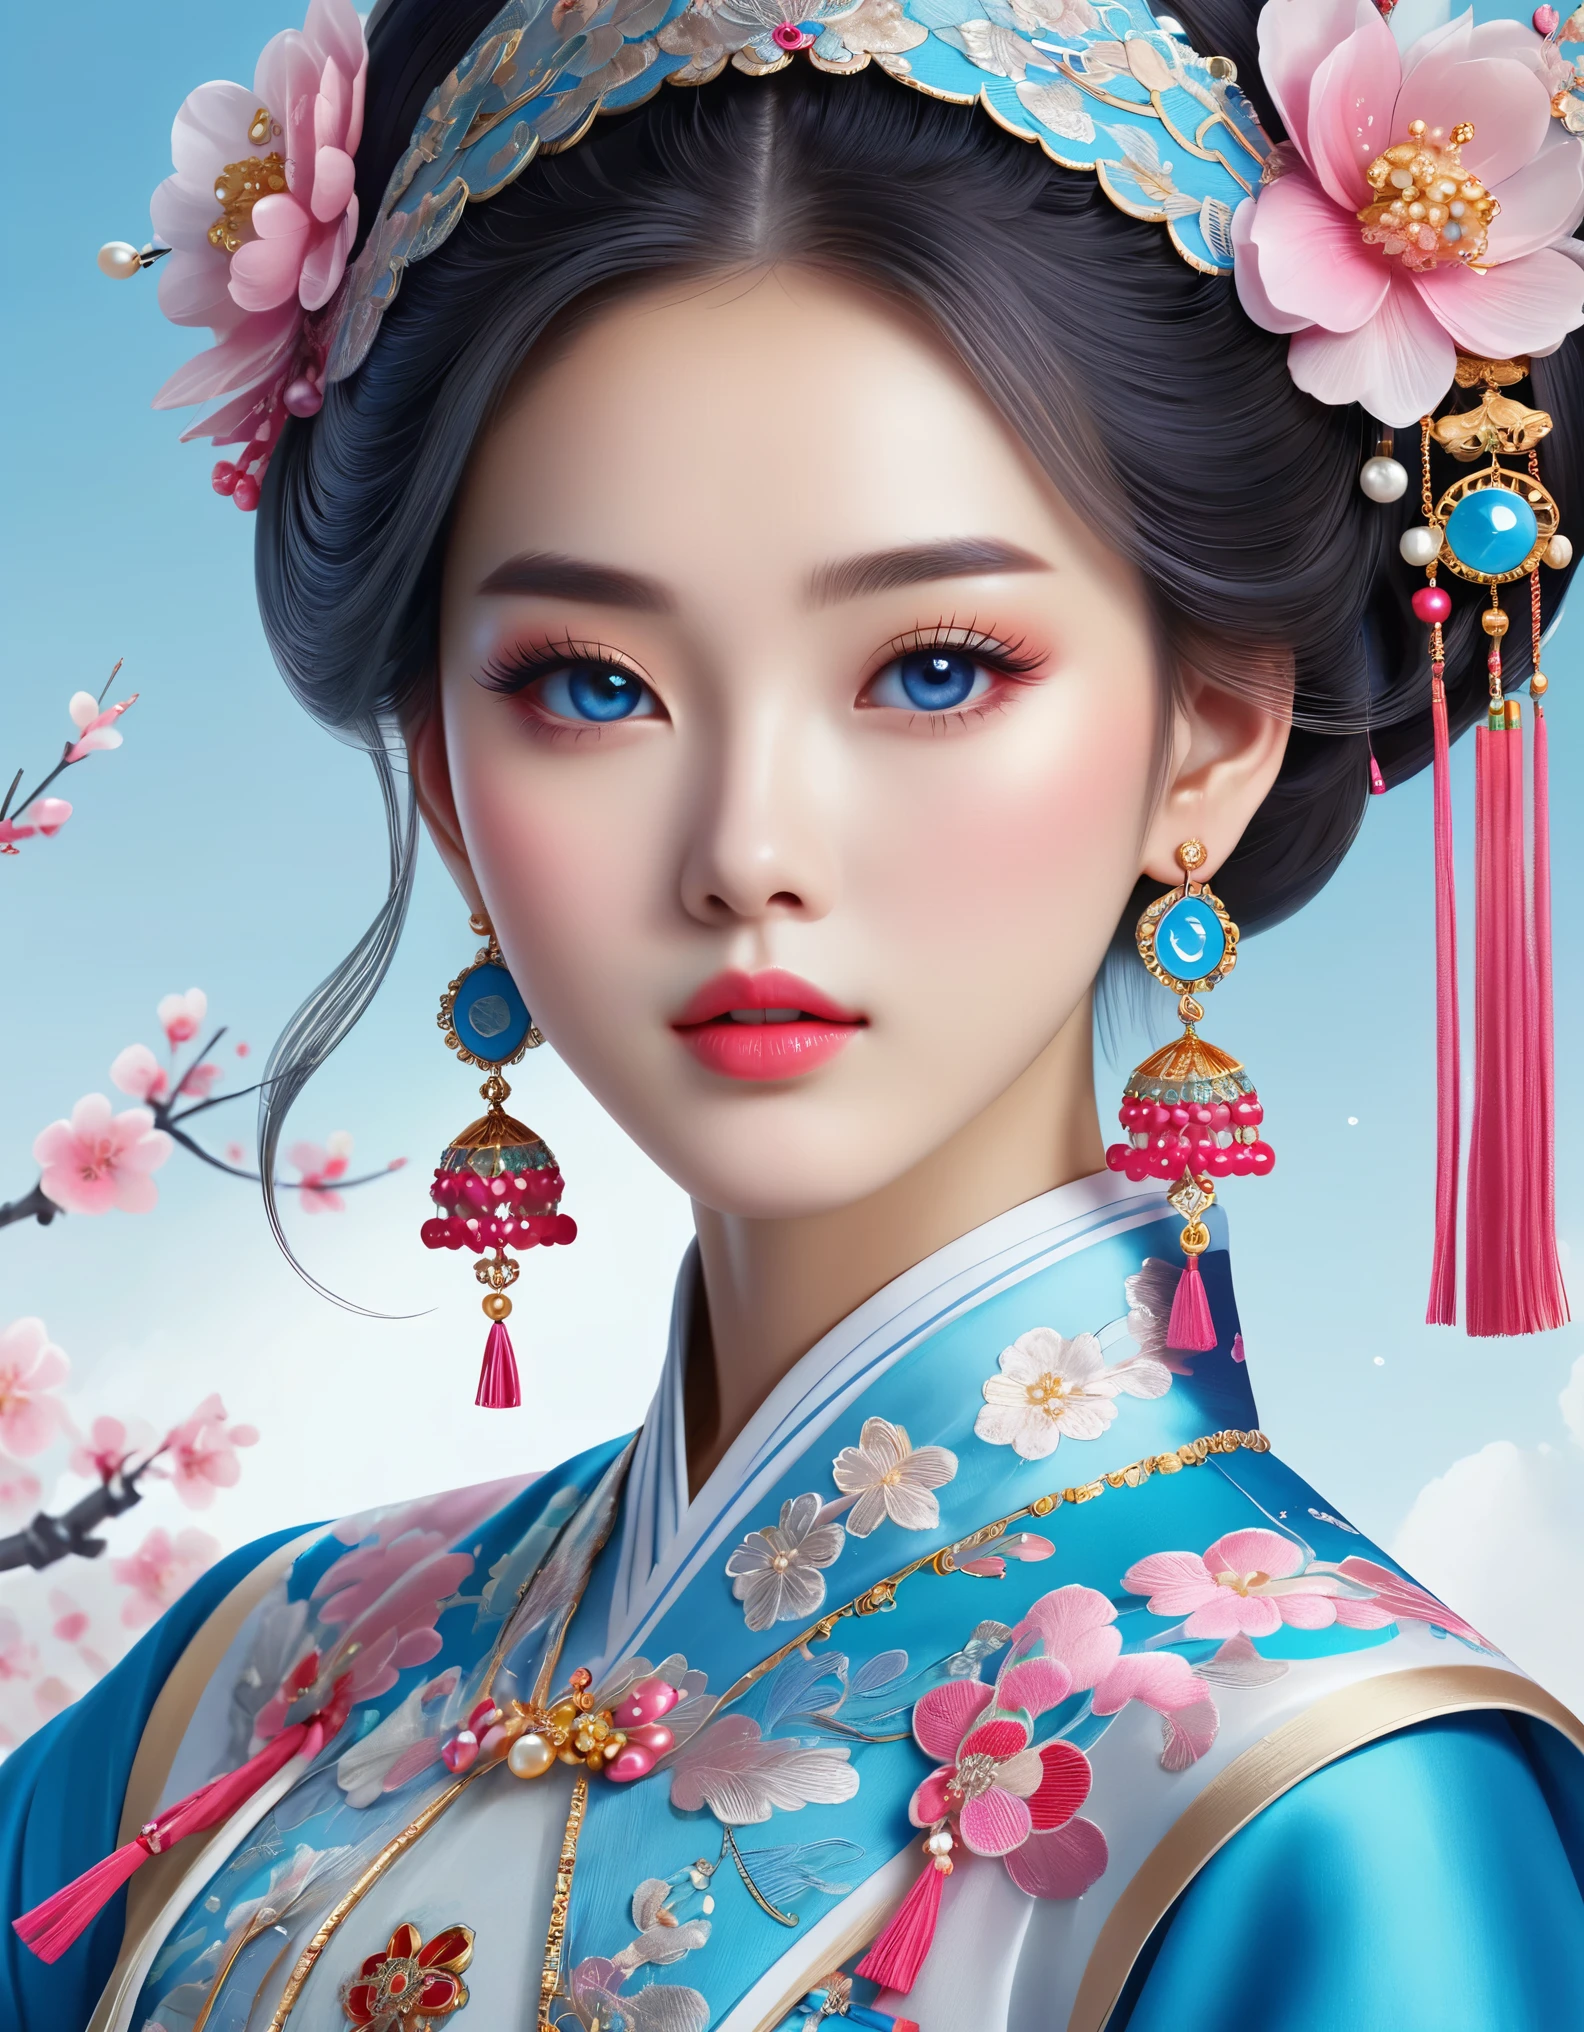 Flying veil covers beautiful Chinese girl's face, pearl earrings, long eyelashes and pink lips, close-up of face, clean face, round chin, blue eyes, blue hanbok with embroidery, white background.
Graphic Illustration, 3D Rendering, Bright colors and fine details, as illustration poster, in 2d game art style, color corrected, HD, 32K ,niji